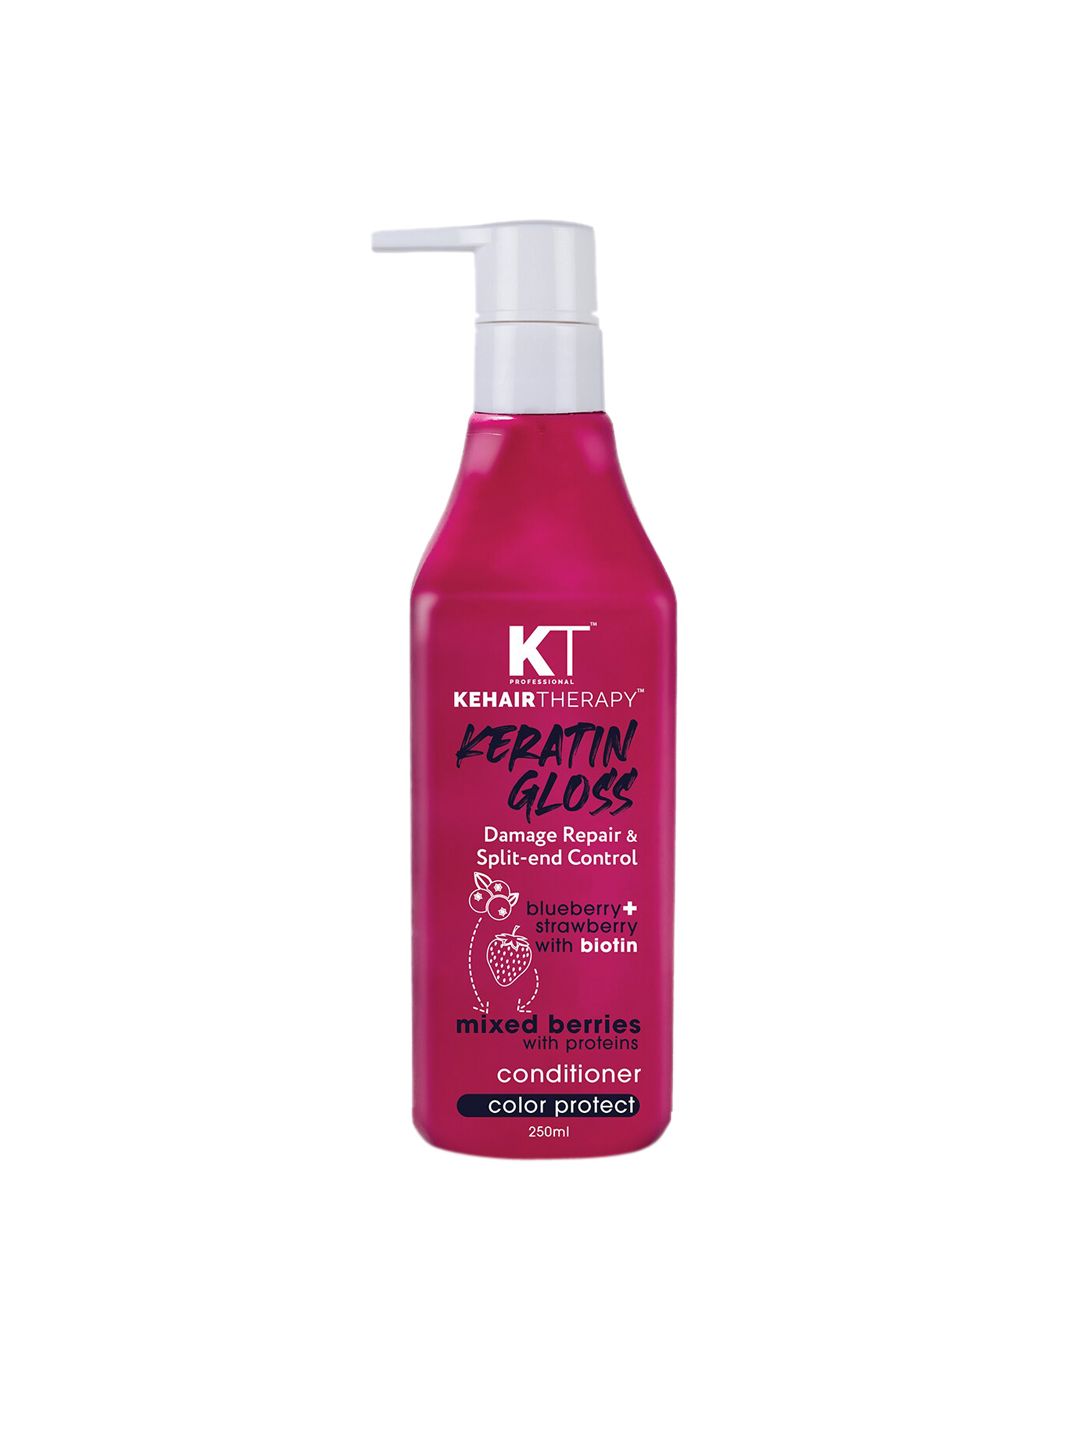 KEHAIRTHERAPY Professional Keratin Gloss Damage Repair & Split End Control Conditioner Price in India